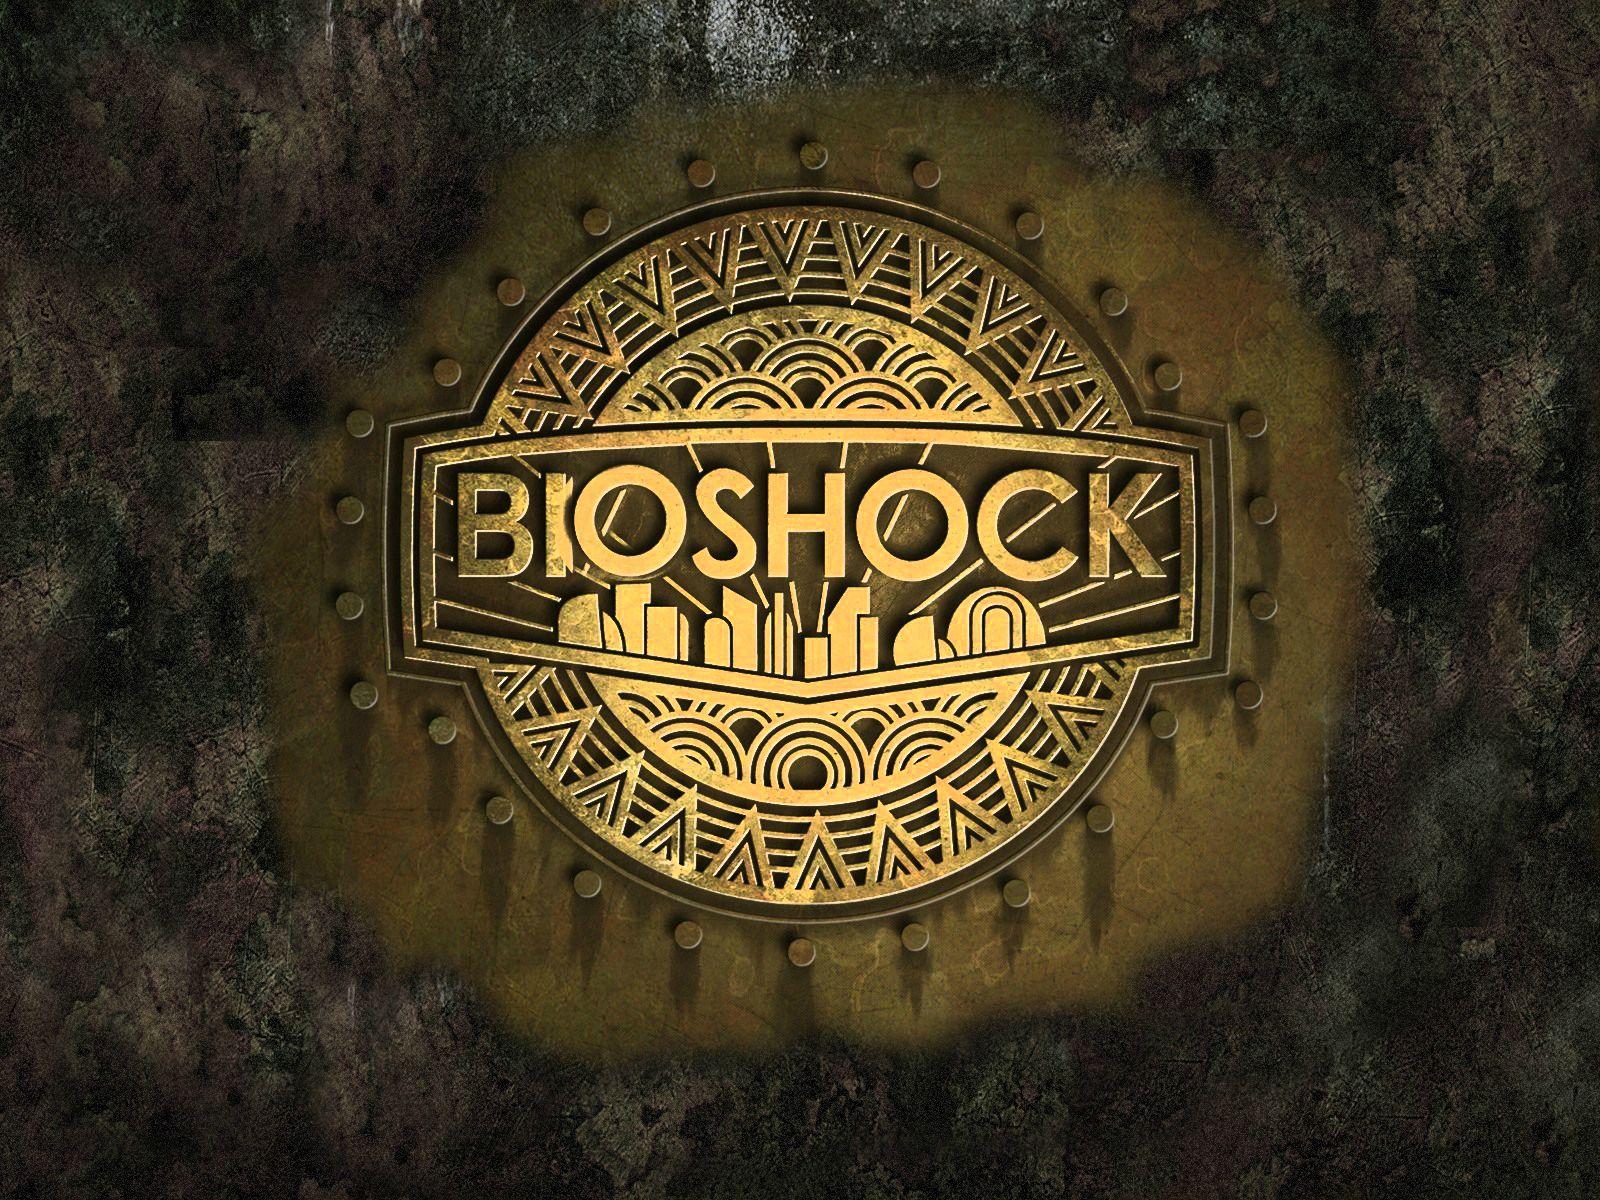 Here is my new collection of Bioshock wallpaper